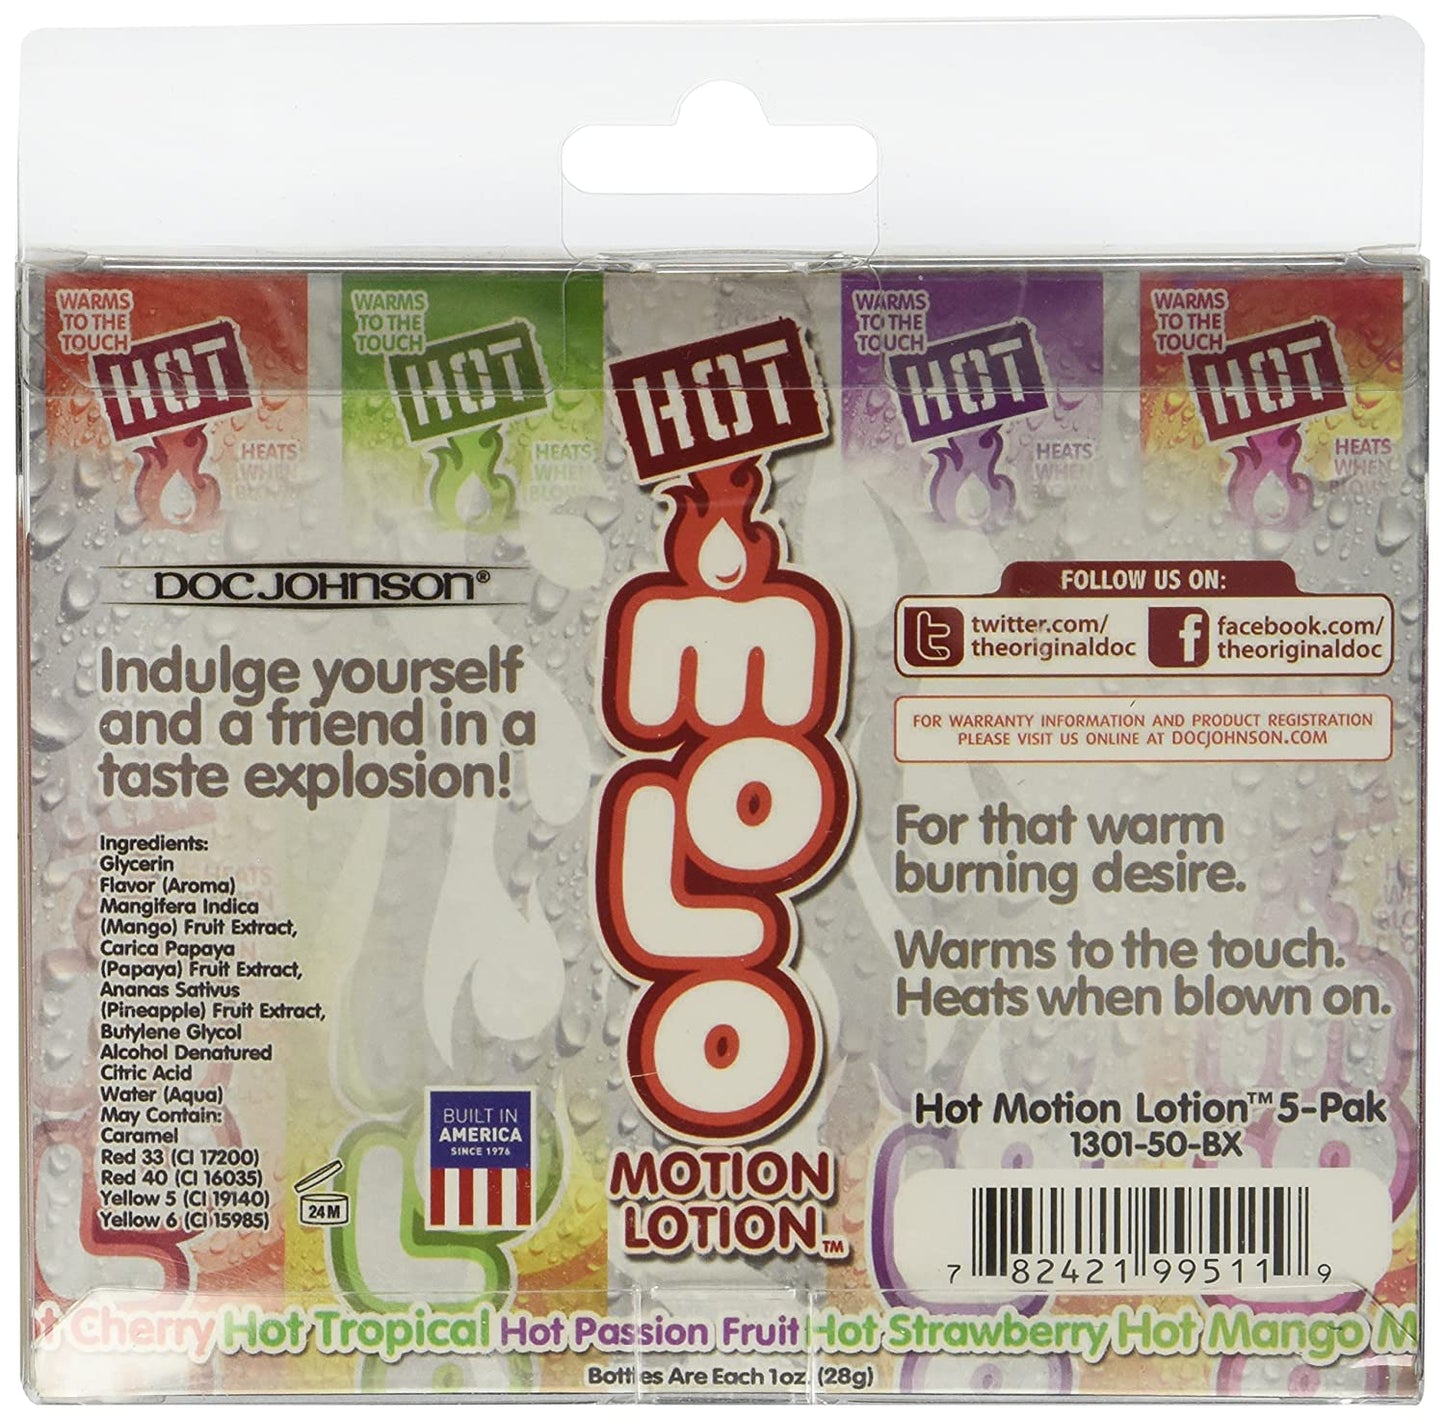 Hot motion lotion - 1 oz bottle pack of 5 assorted flavors